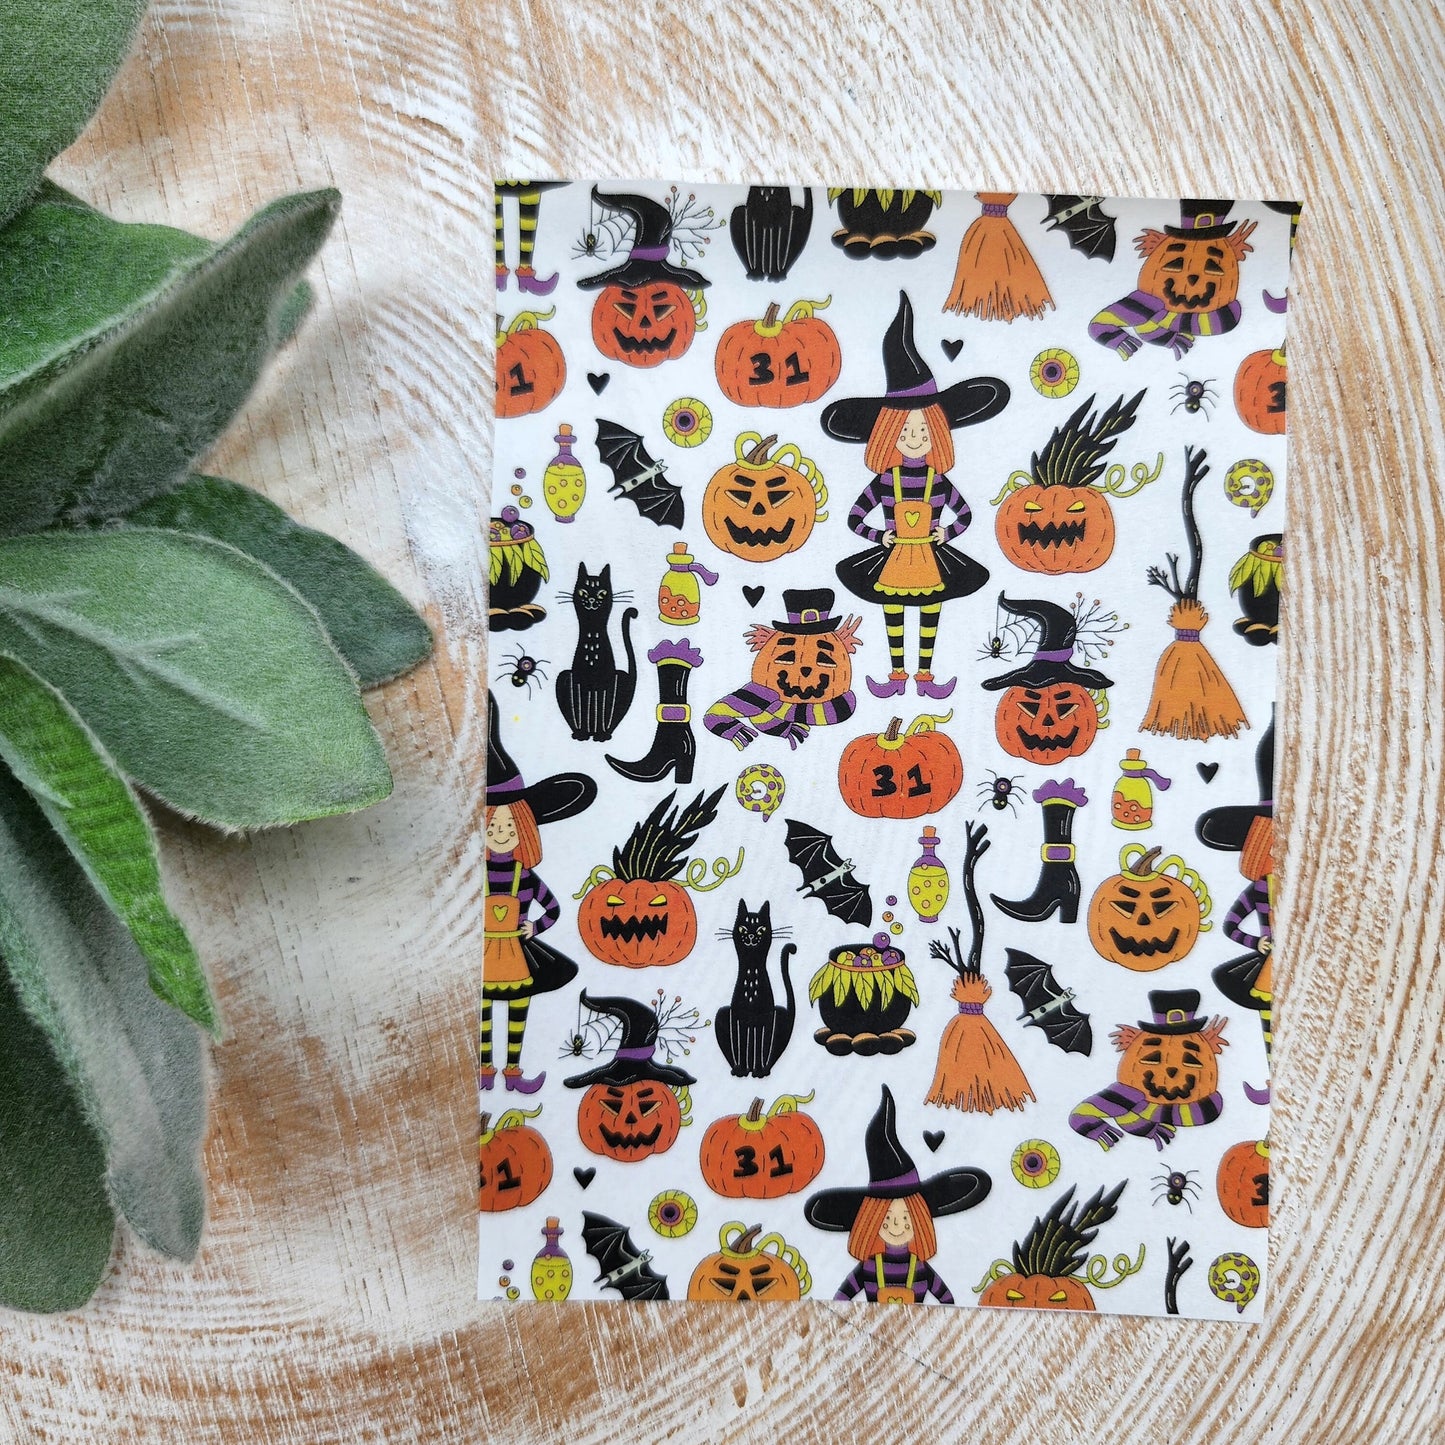 Clay transfer paper/Image transfer paper for clay/Water soluble paper for polymer clay/Halloween Pumpkin Cat Witch pattern transfer sheets